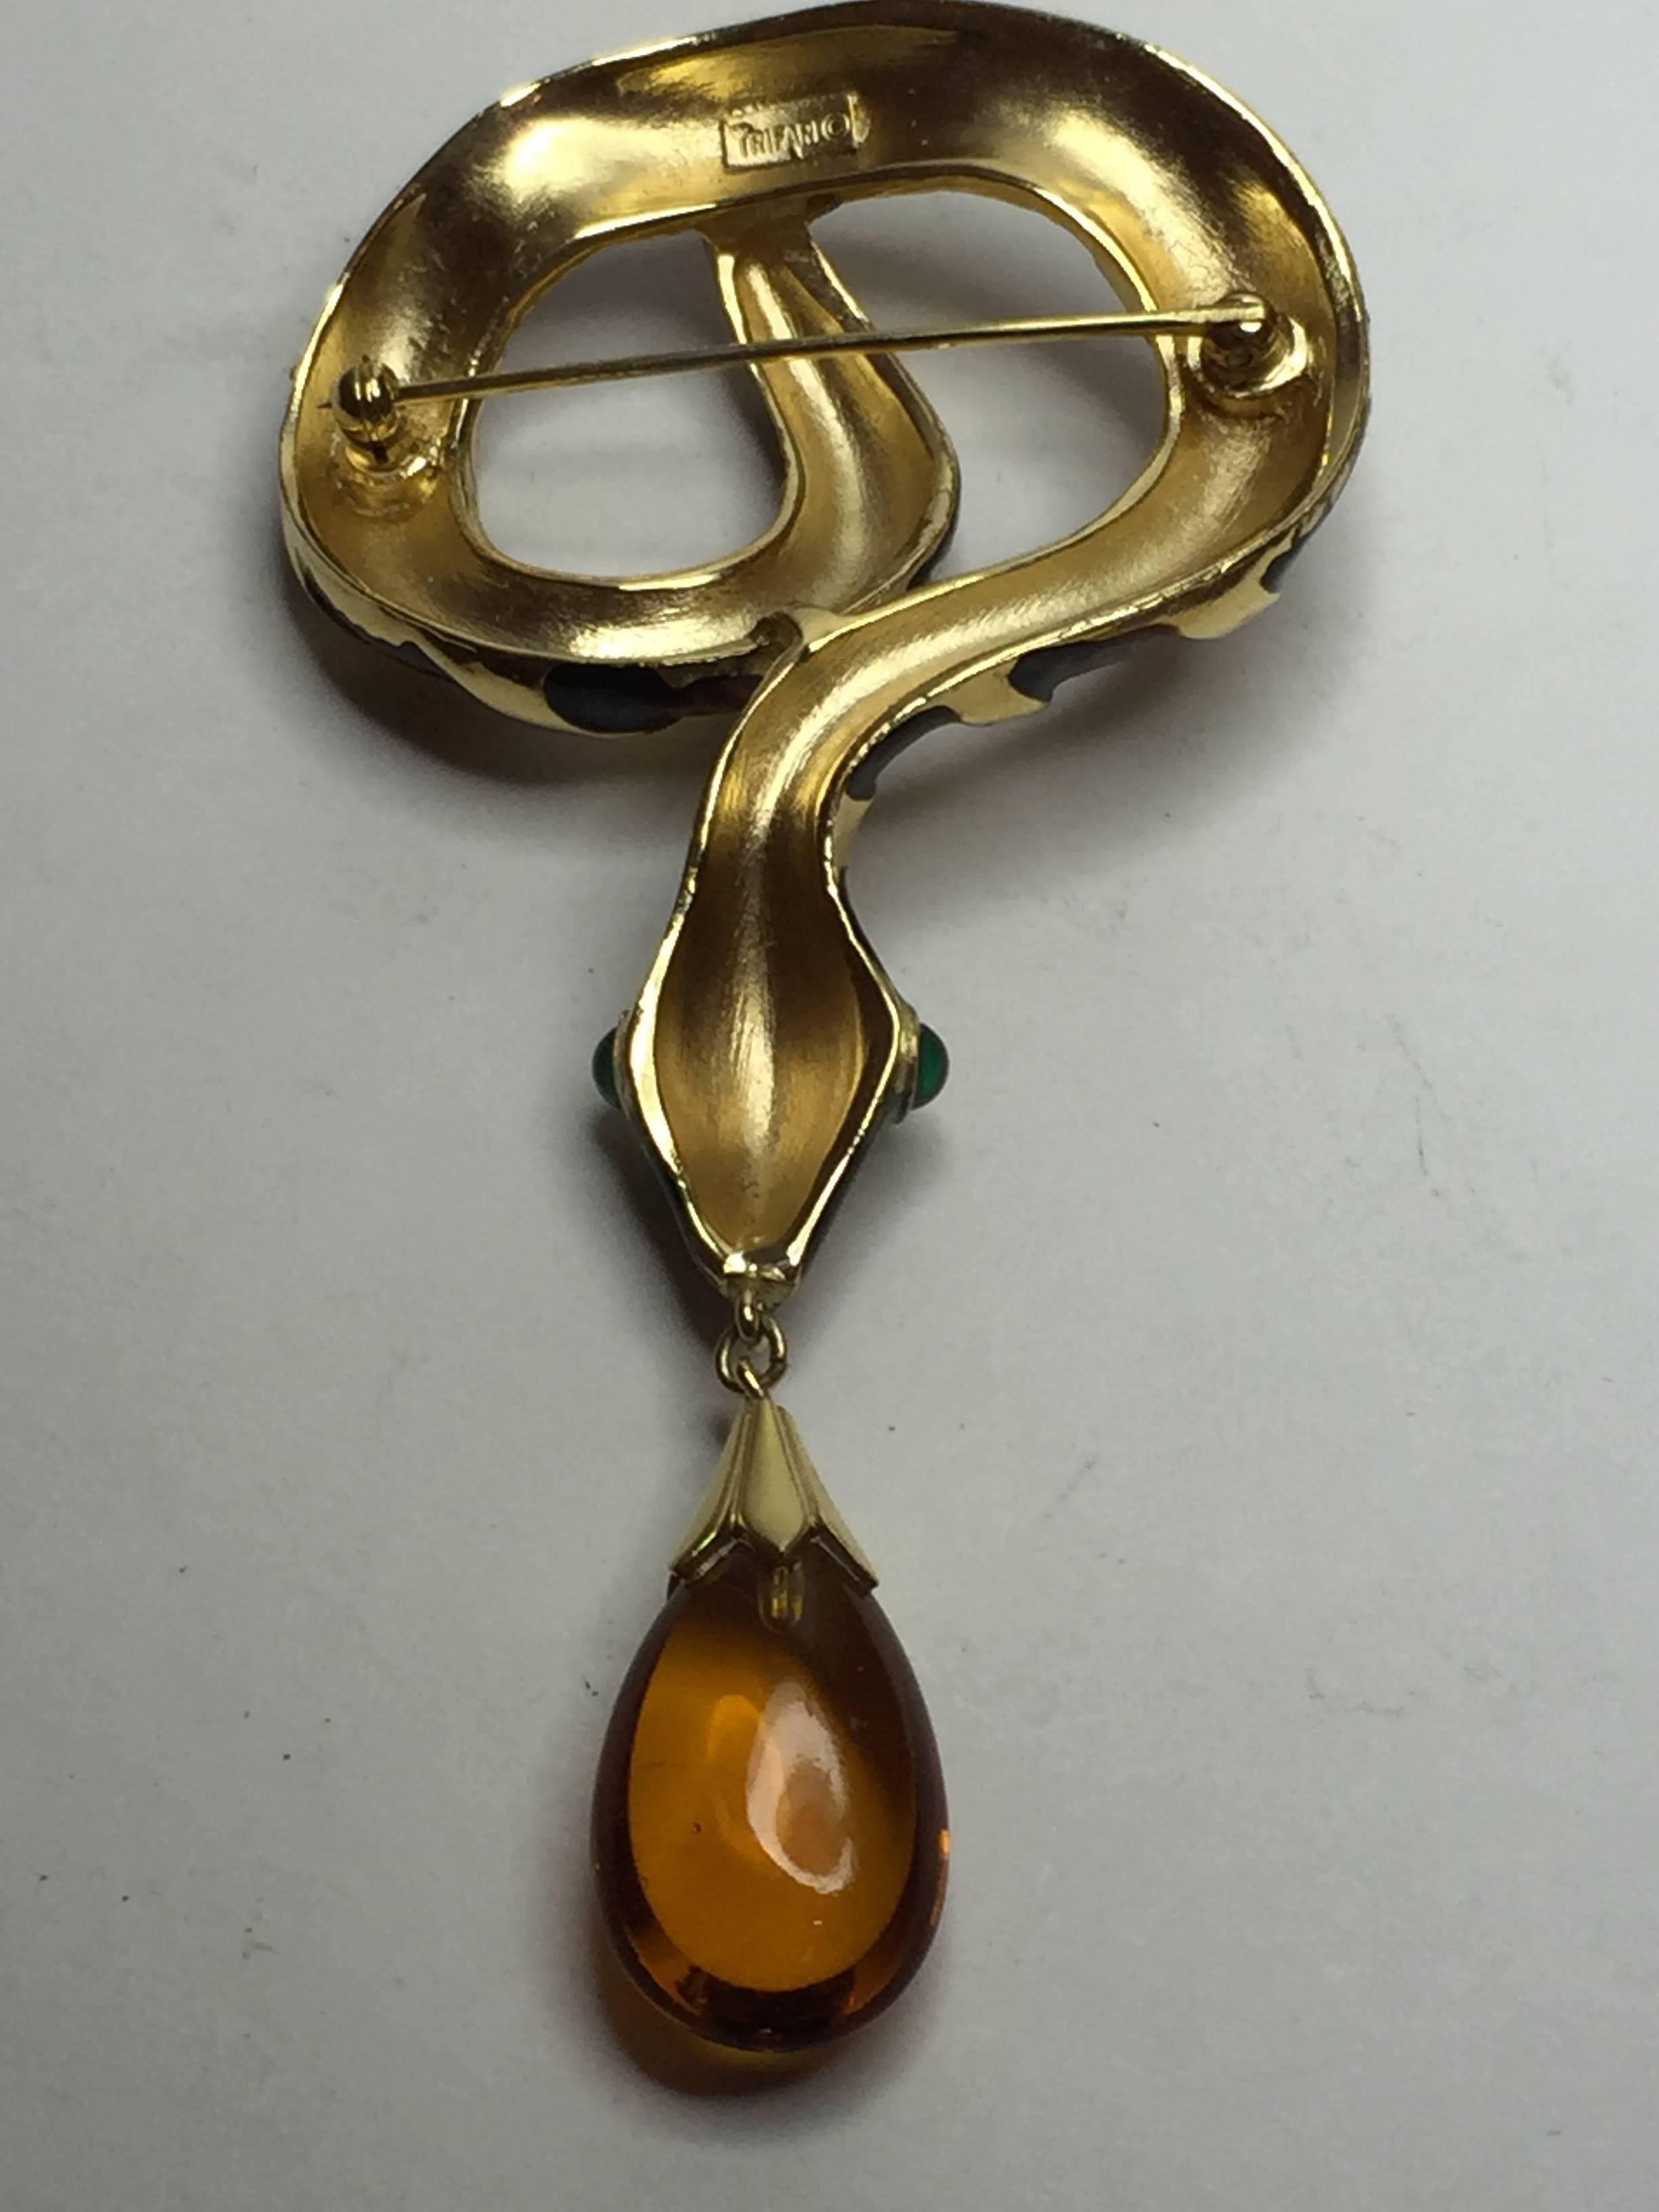 1960s TRIFARI Enamel & Goldtone Coiled Snake Brooch Pin with Amber Teardrop In Excellent Condition For Sale In Palm Springs, CA